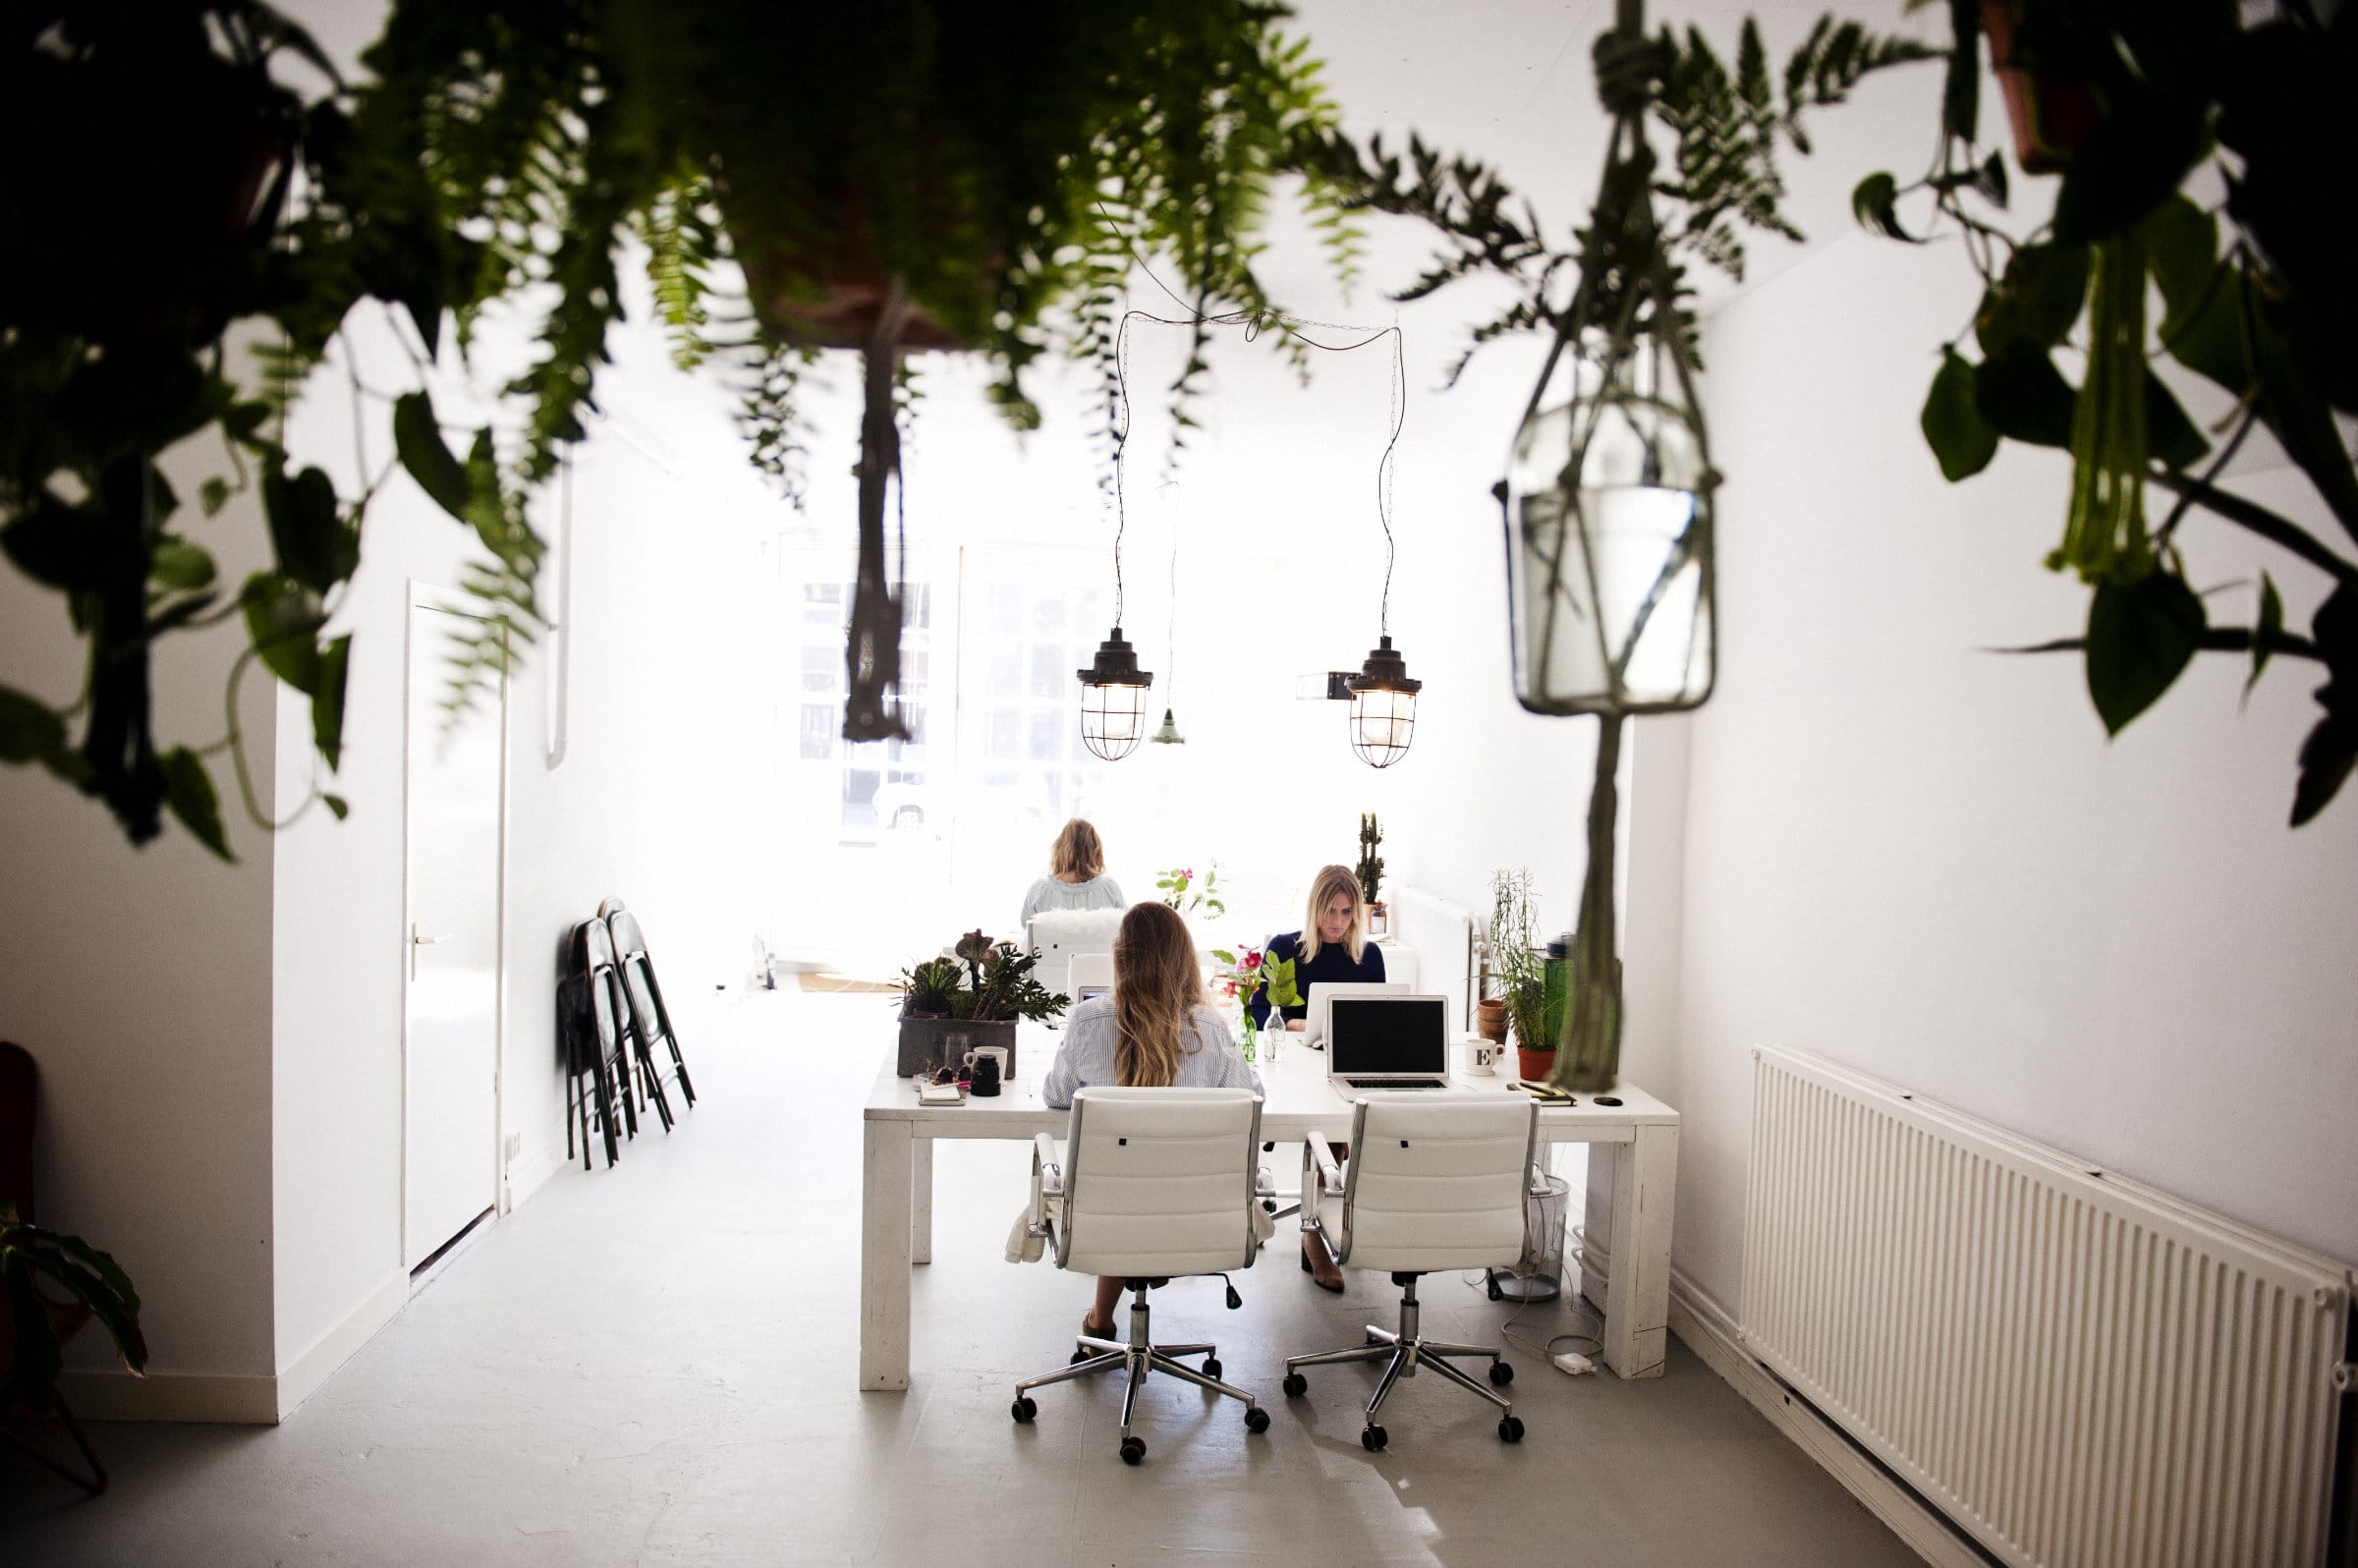 The Style Office - Emilie Sobels // Hashtag Workmode